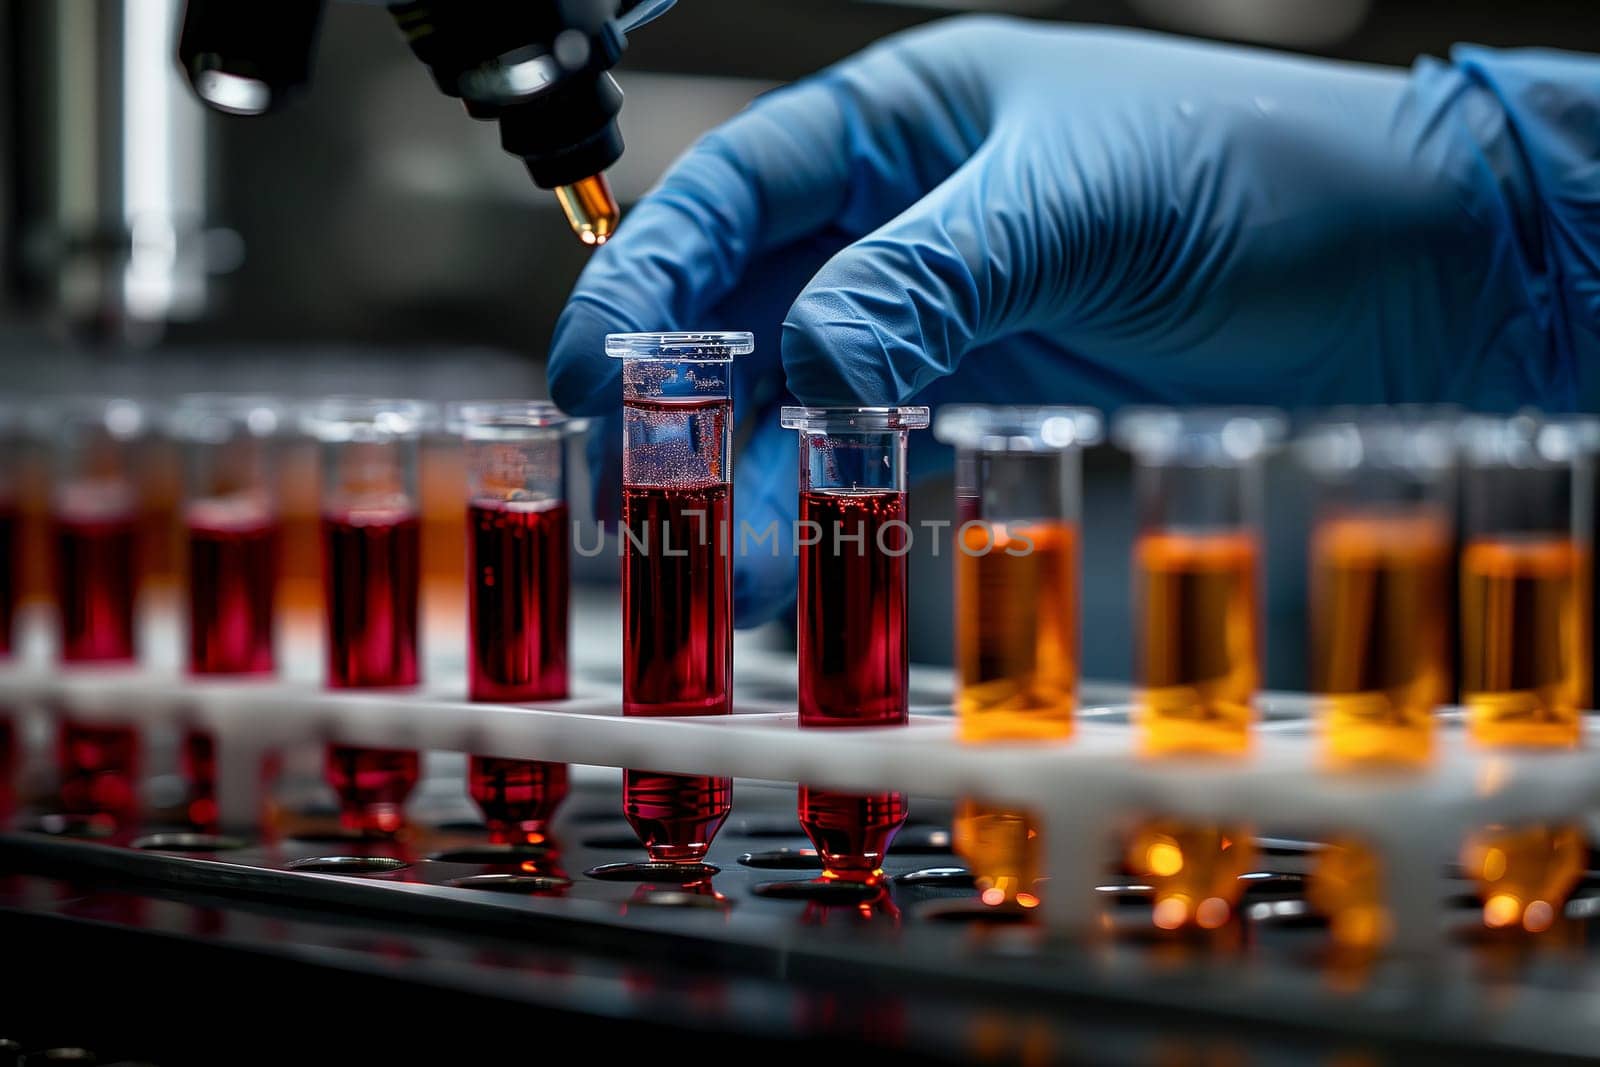 An individual is transferring a fluid into a test tube in a lab using drinkware. The liquid could be a solution, an alcoholic beverage, beer, or another type of alcohol